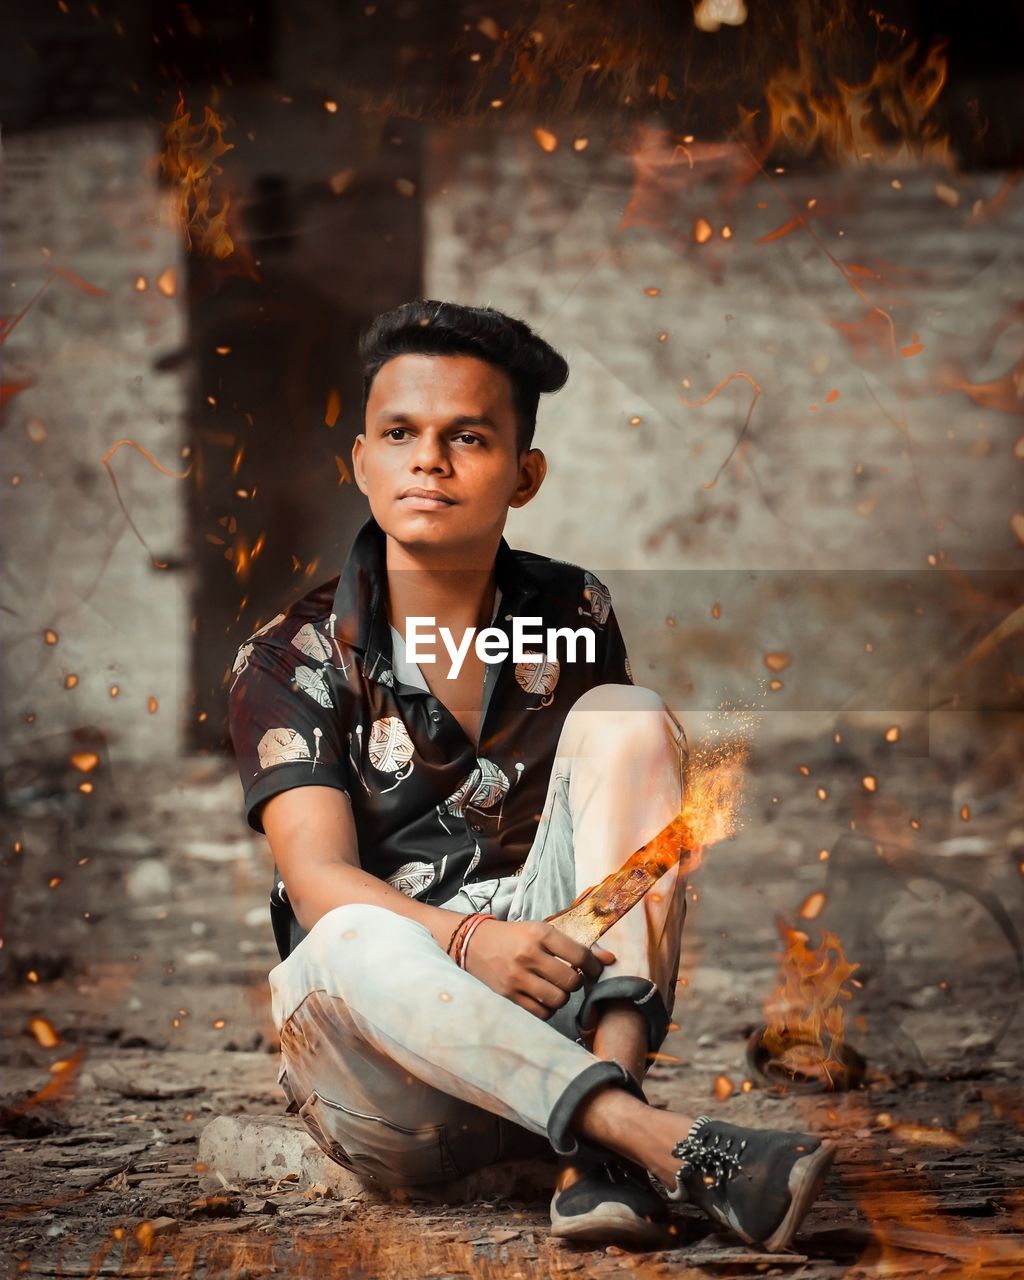 Digital composite image of young man sitting amidst fire